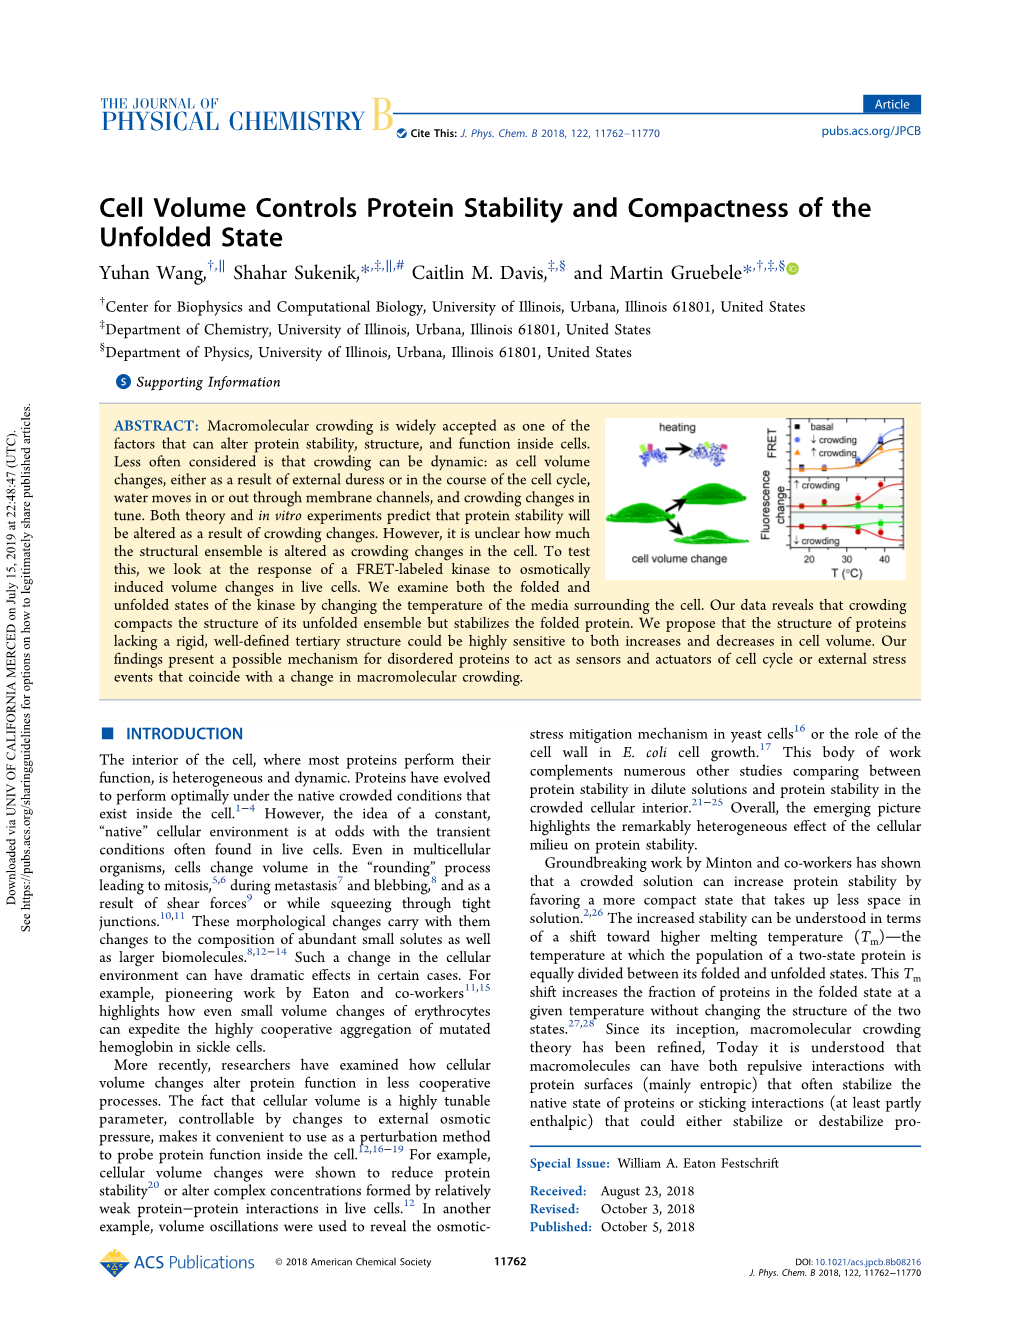 Cell Volume Controls Protein Stability and Compactness of the Unfolded State † ∥ ‡ ∥ # ‡ § † ‡ § Yuhan Wang, , Shahar Sukenik,*, , , Caitlin M